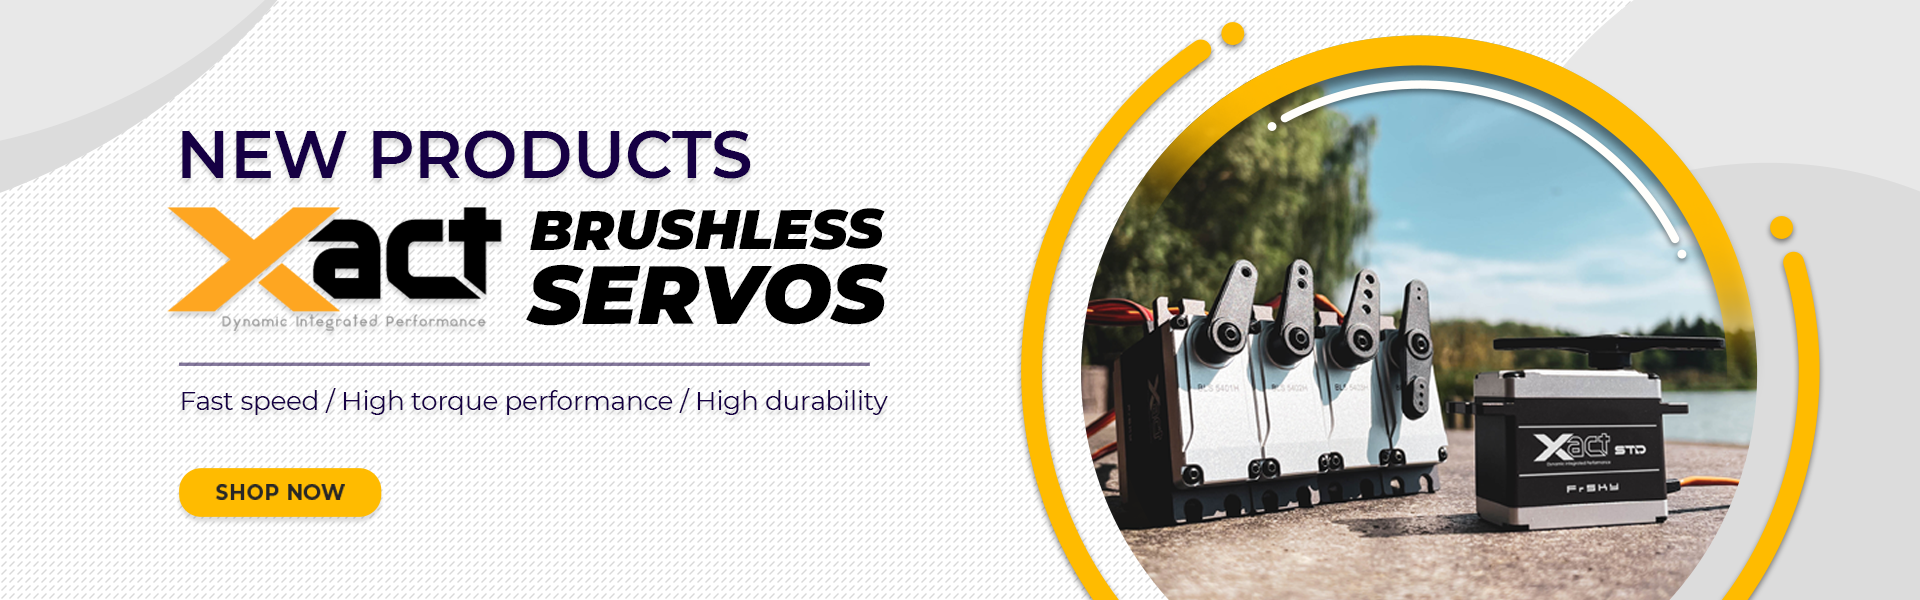 FrSky Xact Brushless Series BLS5400H Series